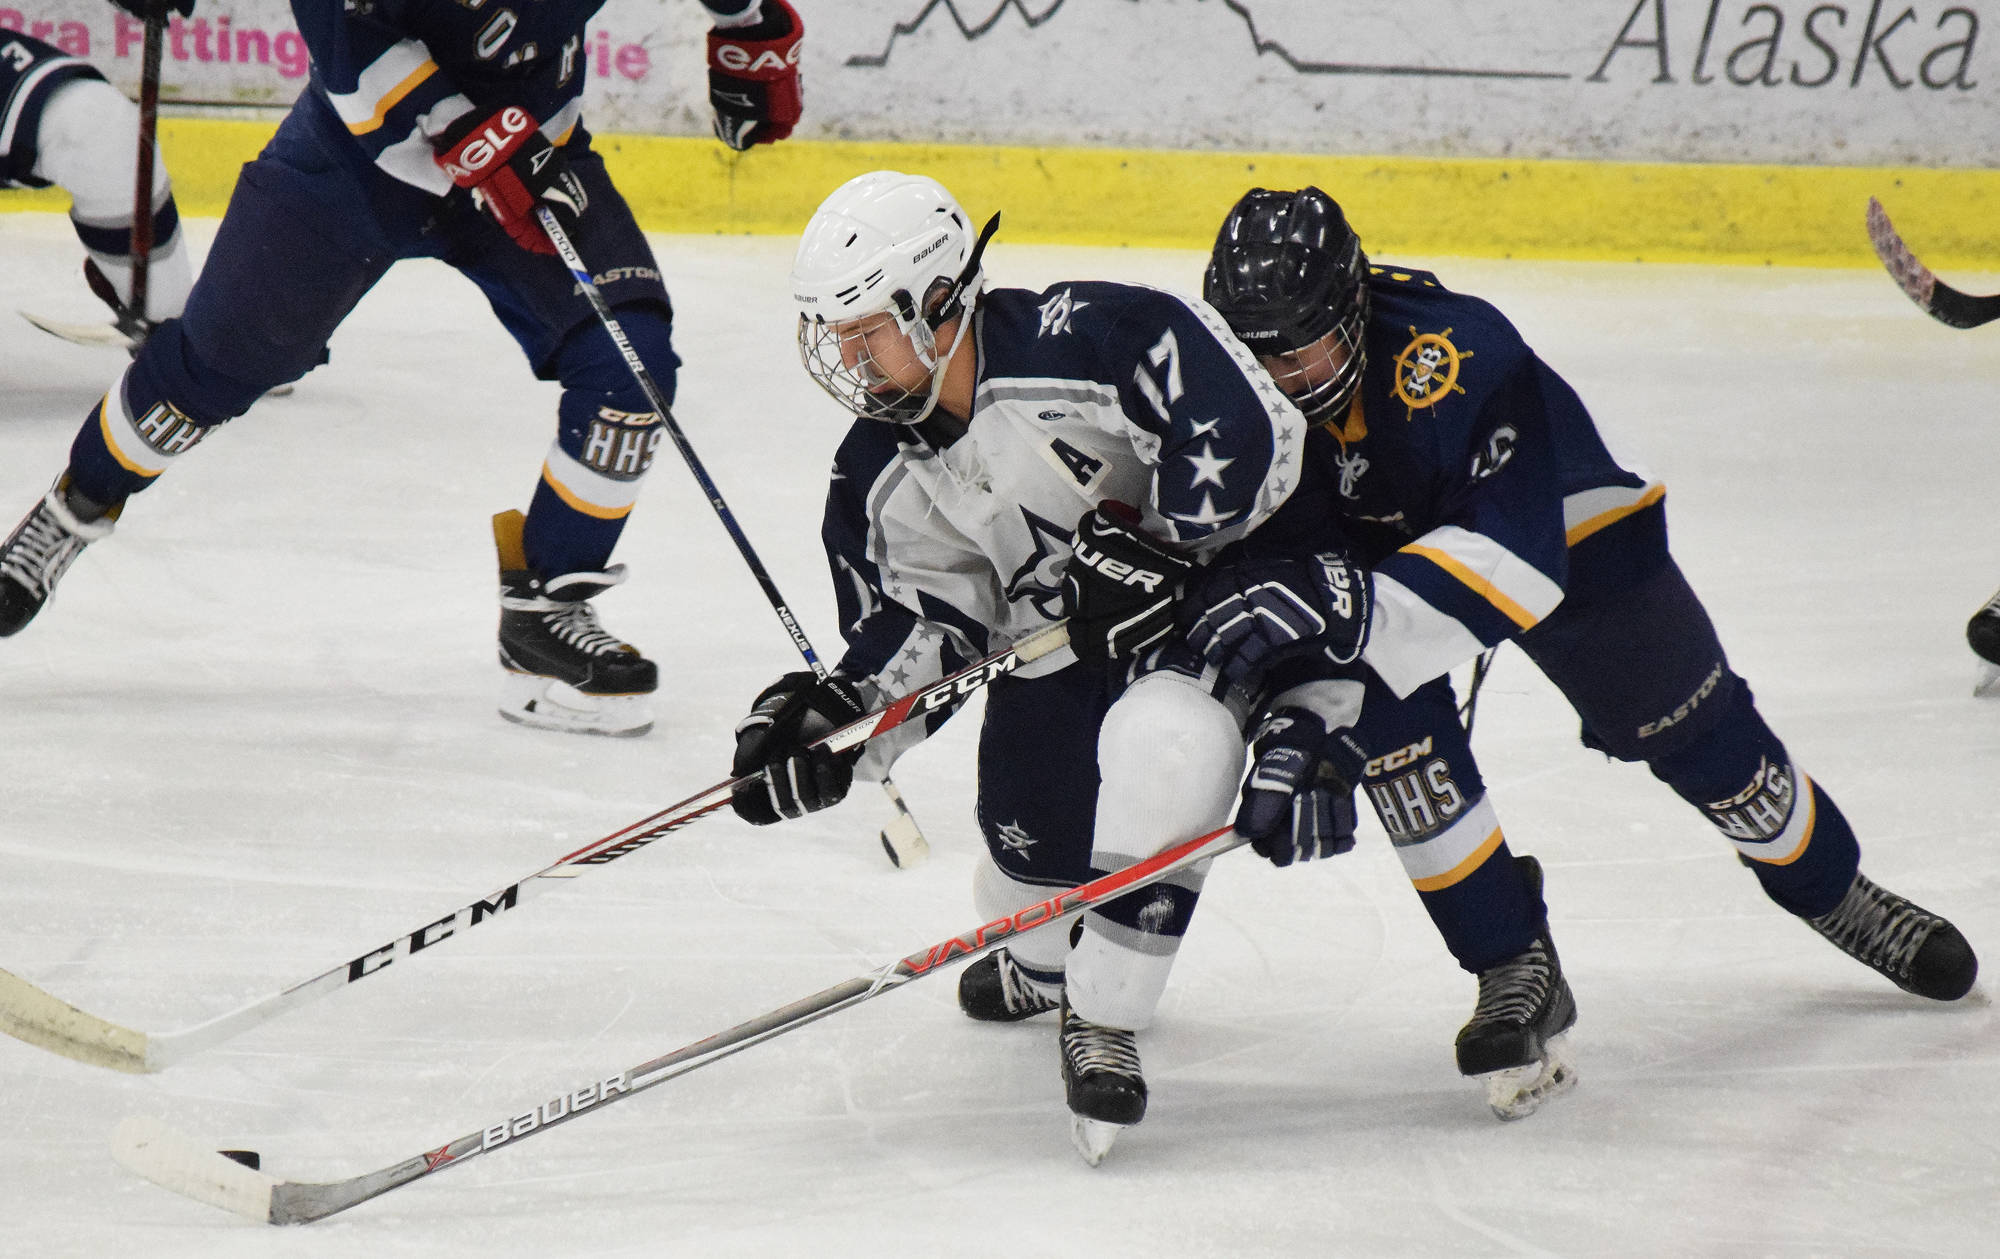 Soldotna skater Wyatt Medcoff (left) battles for the puck against Homer’s Ethan Pitzman Tuesday night at the Soldotna Regional Sports Complex. (Photo by Joey Klecka/Peninsula Clarion)